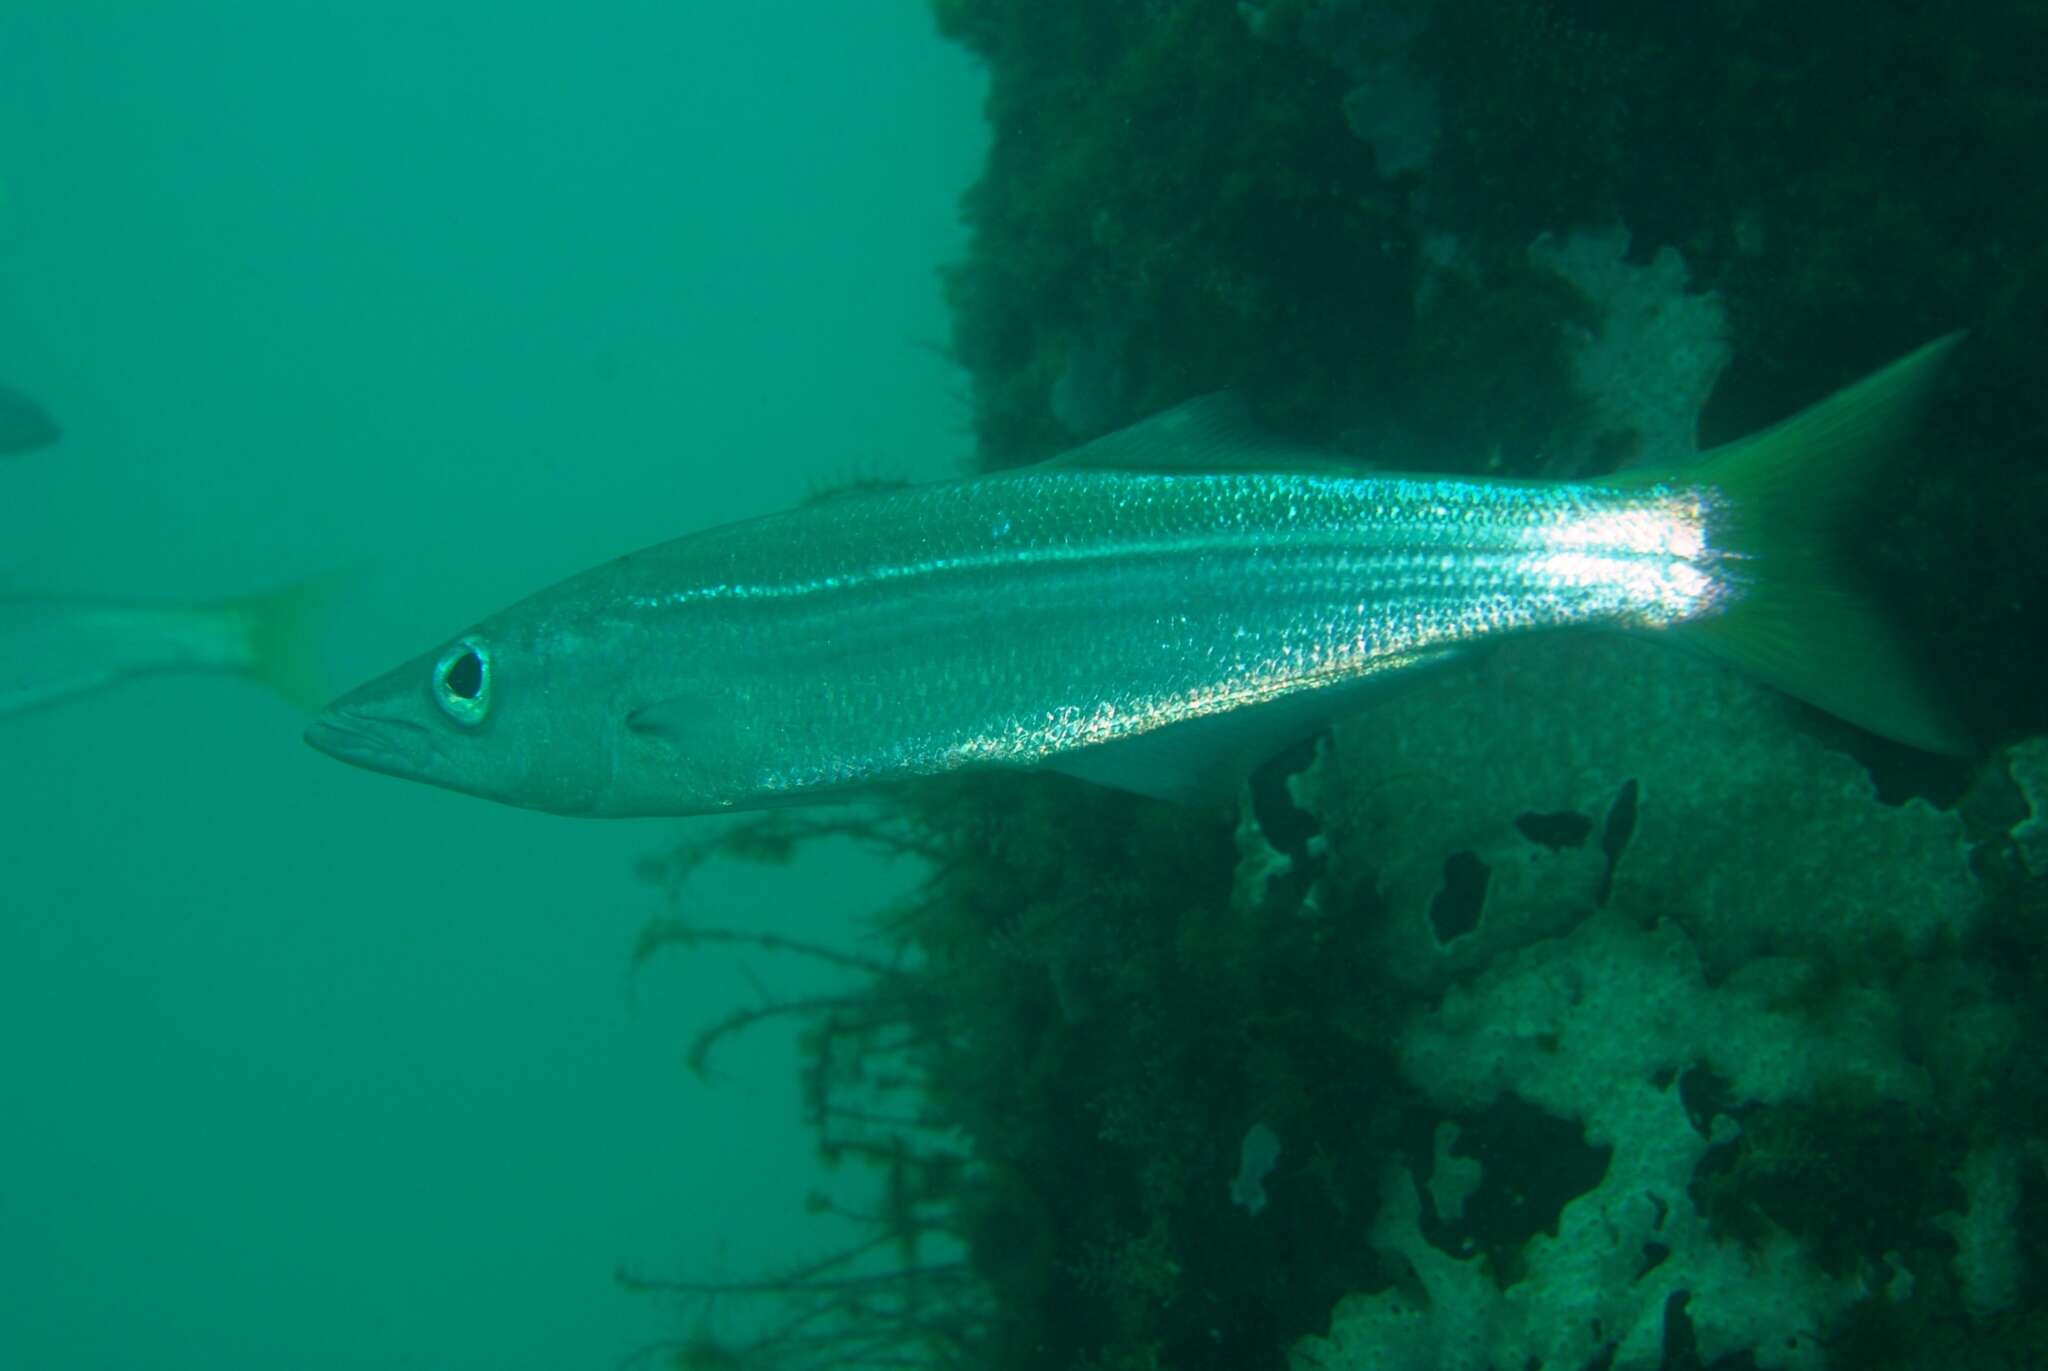 Image of long-finned pike